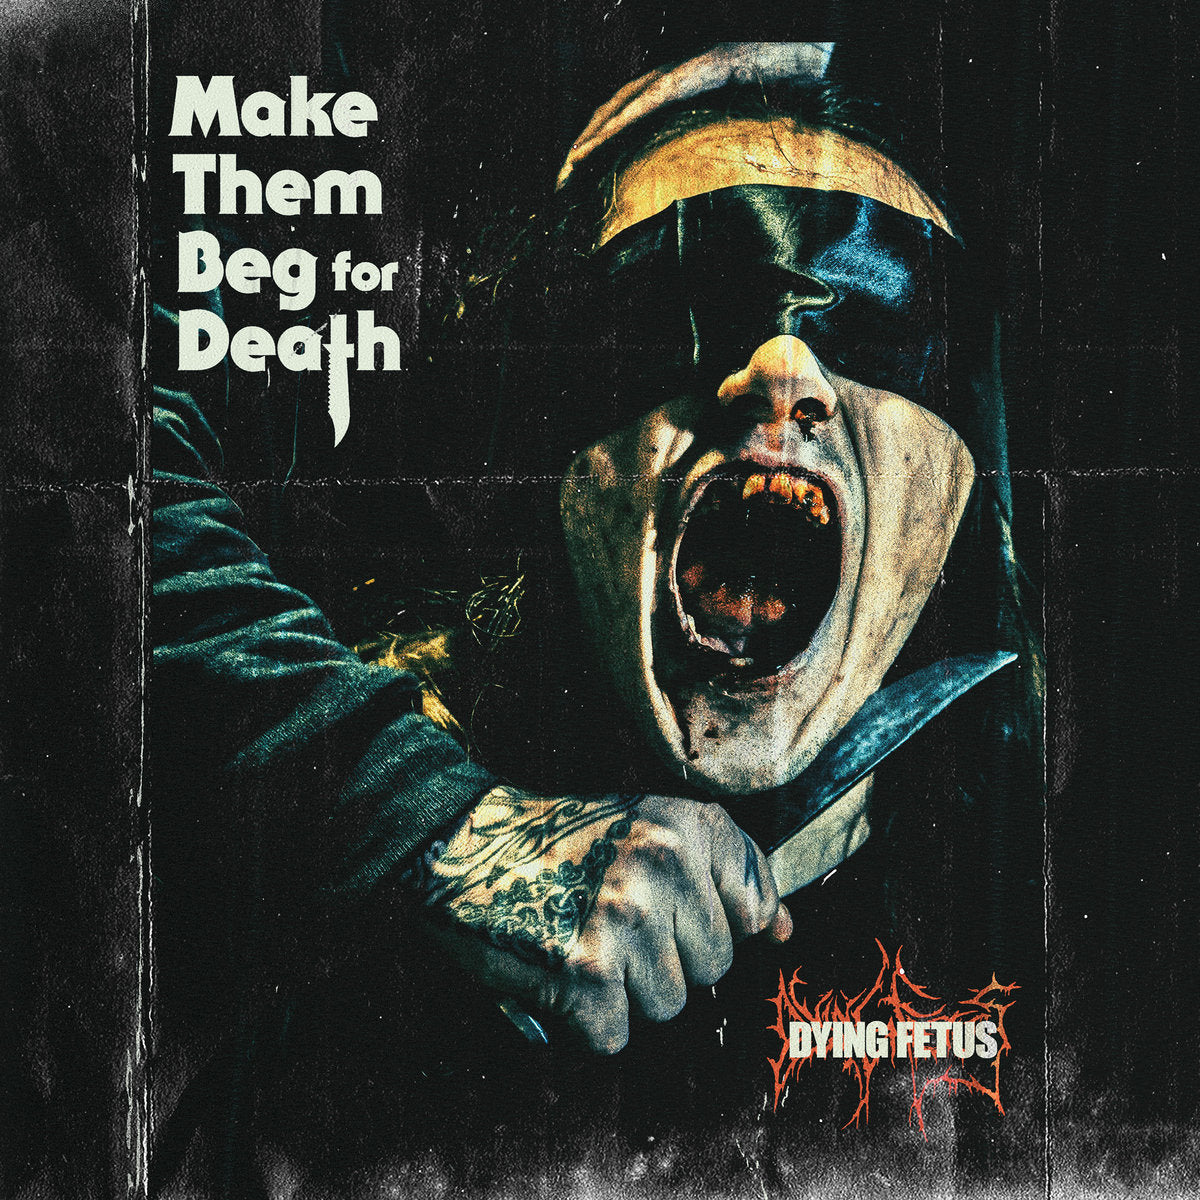 DYING FETUS "Make Them Beg For Death" LP